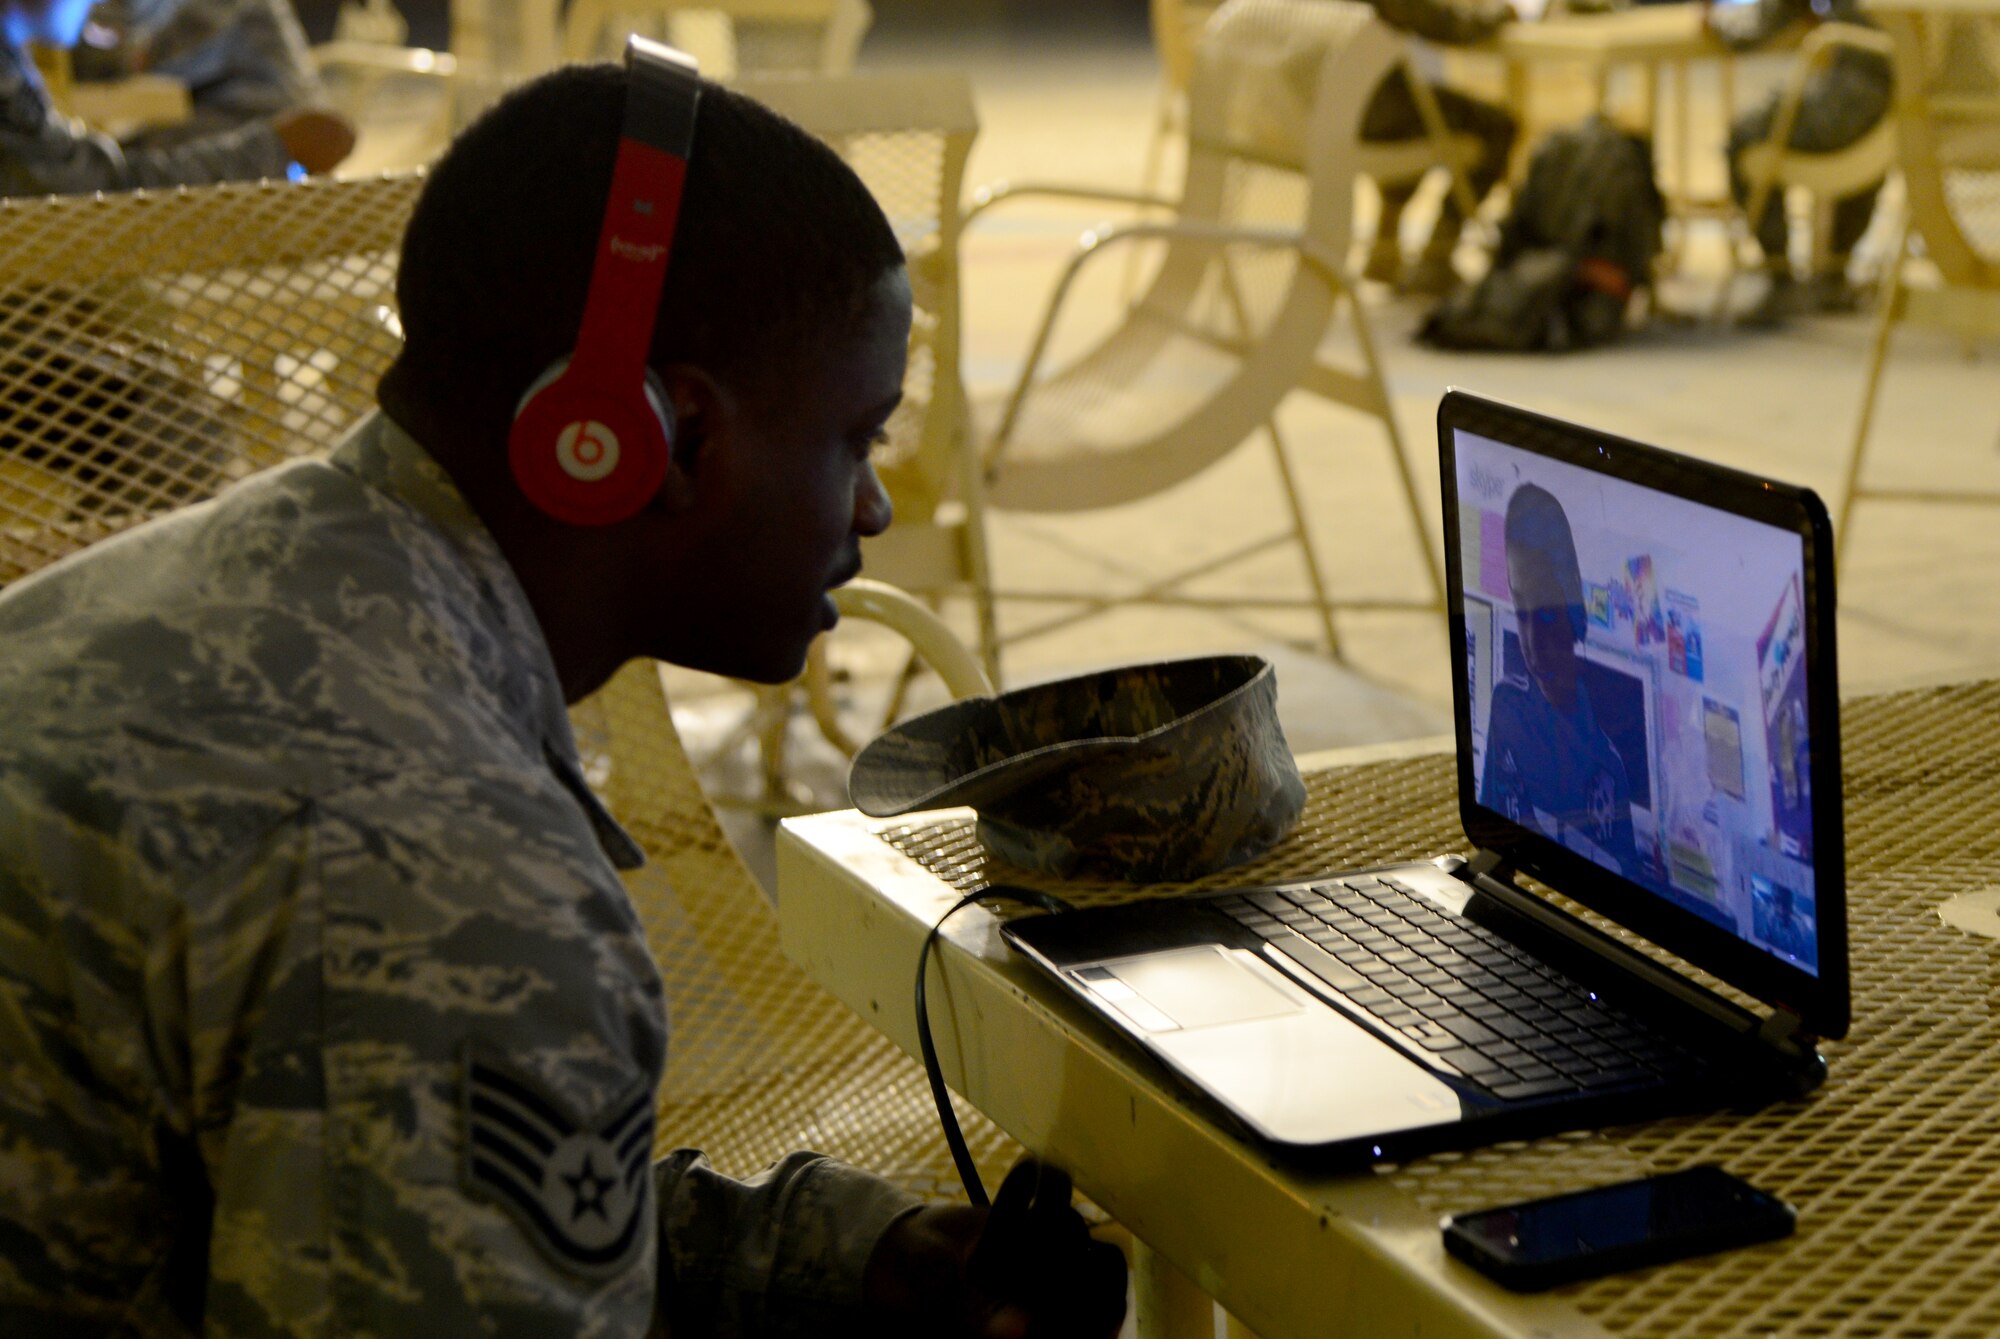 U.S. Air Force Staff Sgt. Corey Rainge, 379th Expeditionary Security Forces Squadron military working dog handler, video-chats with a fifth grade student during the “Holler at a Hero” project Nov. 13, 2014, at Al Udeid Air Base, Qatar. The “Holler at a Hero” project was held in recognition of Veteran’s Day by a Security Forces veteran named James Wilson, who is now a teacher in New Jersey. The project allowed Wilson’s fifth grade class to have face-to-face interaction, via online video-messaging, with deployed armed forces members to discuss their job duties, day-to-day activities and any personal challenges military members face while deployed. (U.S. Air Force photo by Senior Airman Kia Atkins)